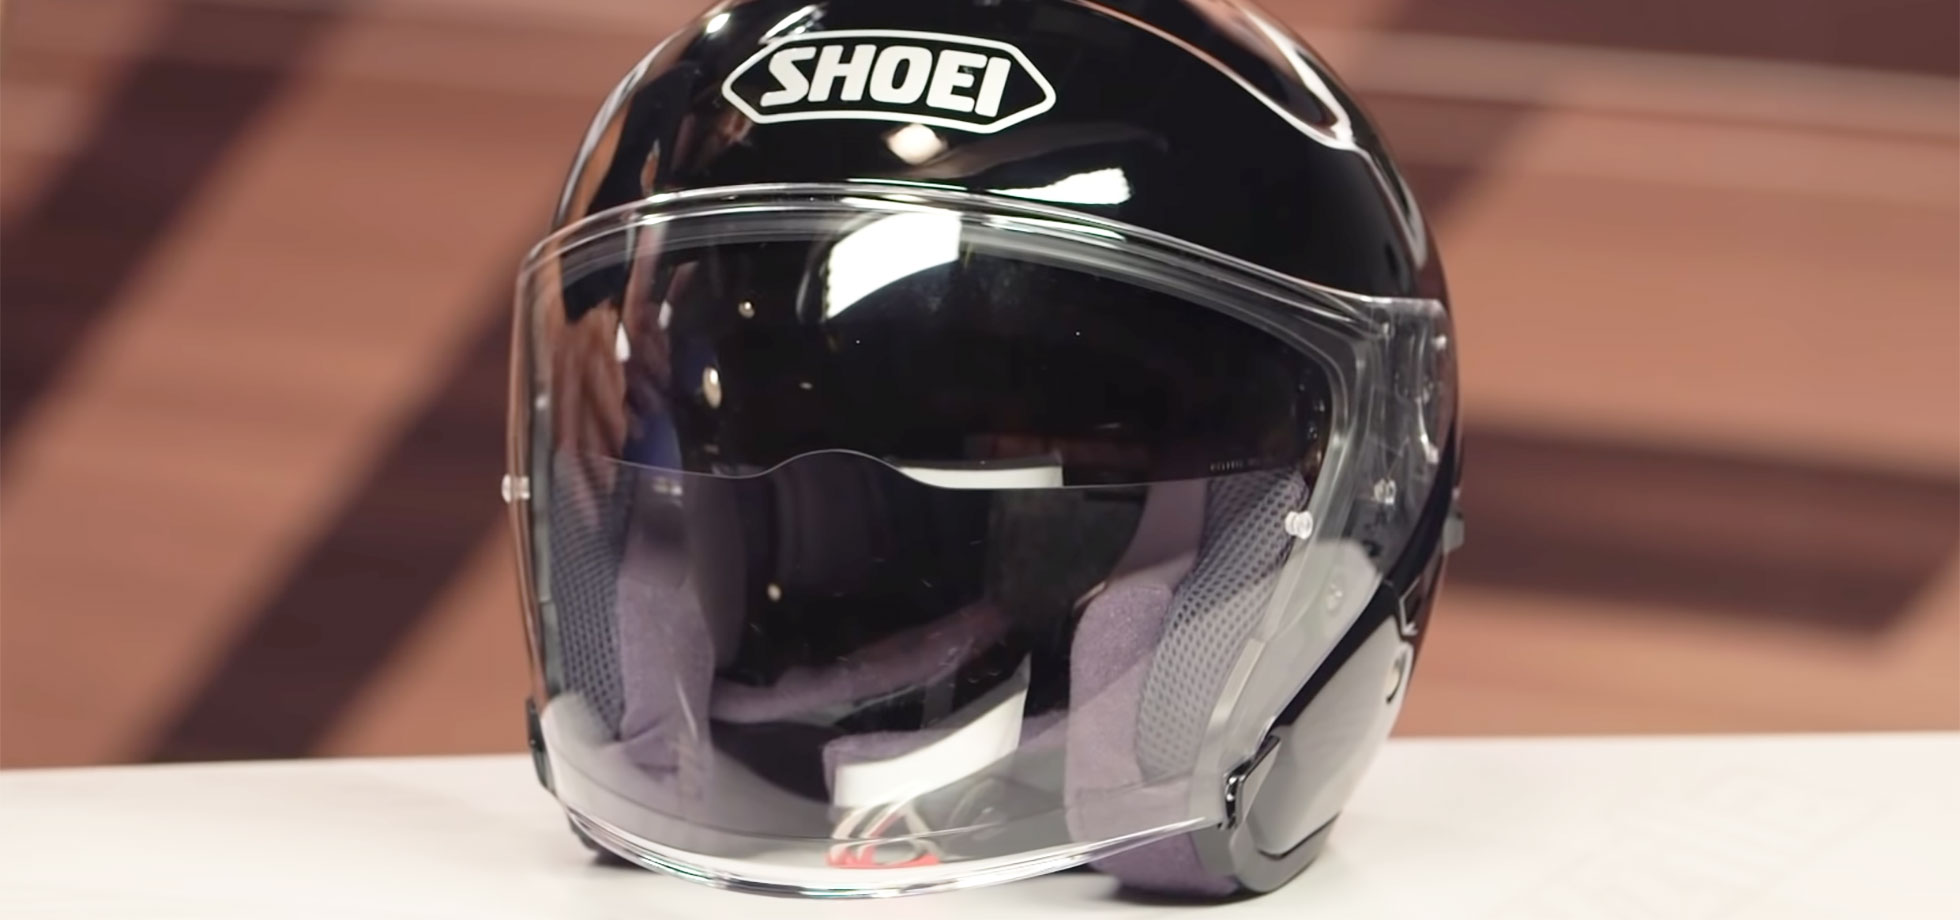 helmet for car and motorcycle riding open type Details about   2021 Motorcycle helmet X14 3/4 